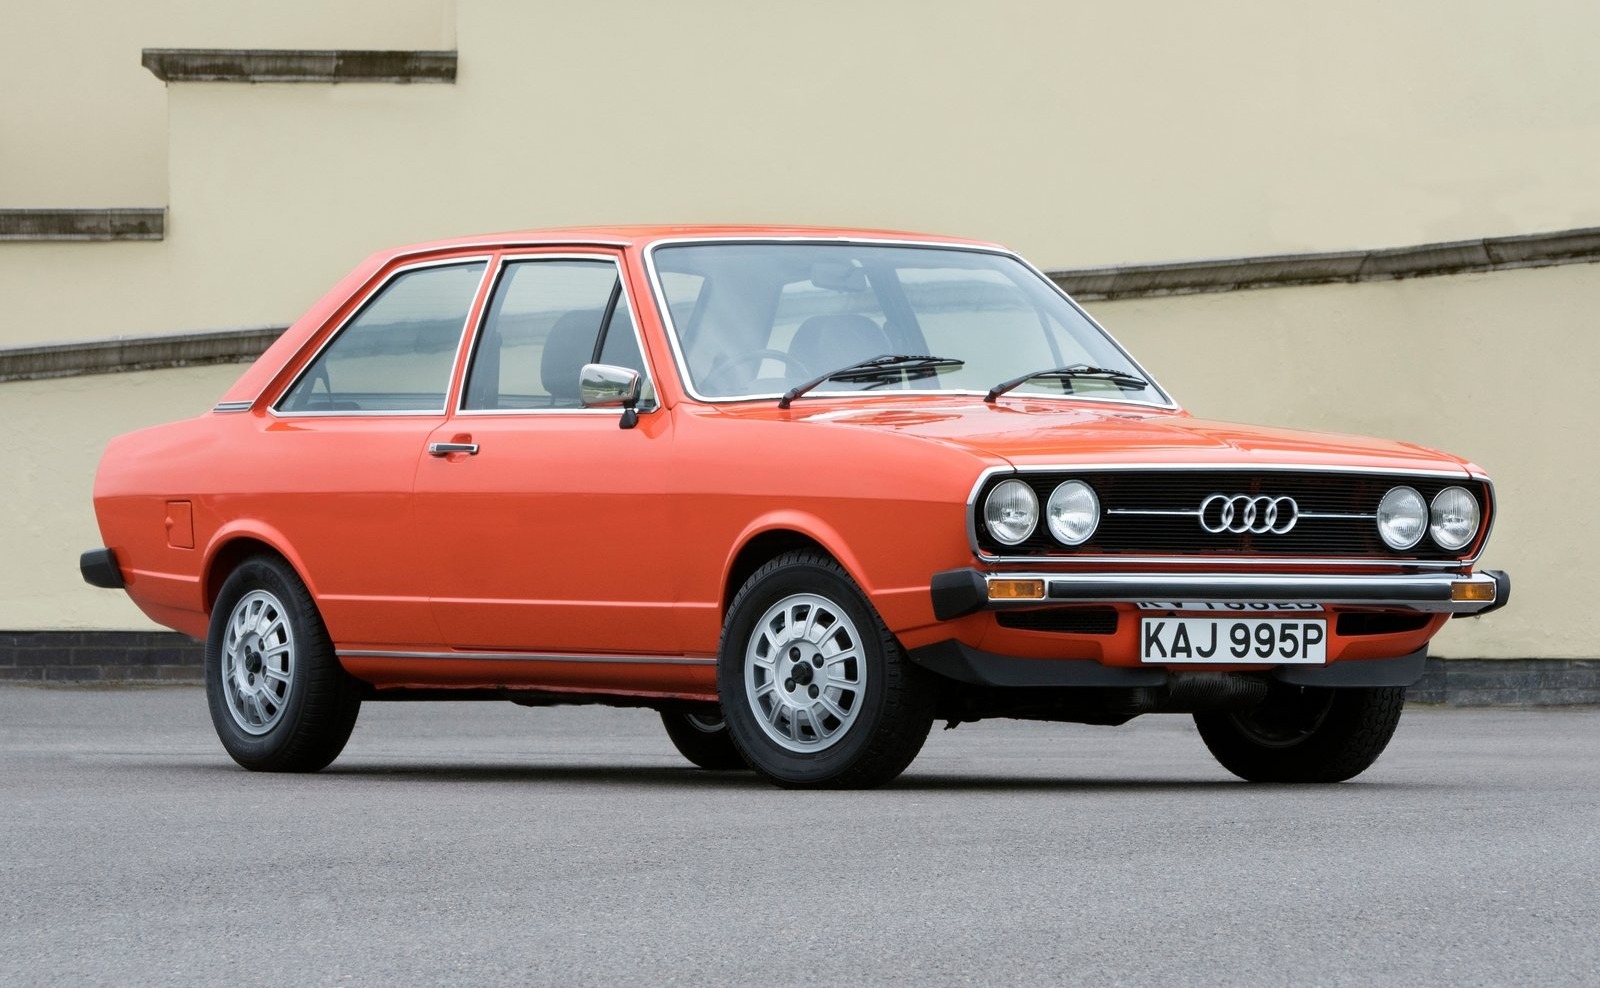 What is the Audi 80 Scrap Value?